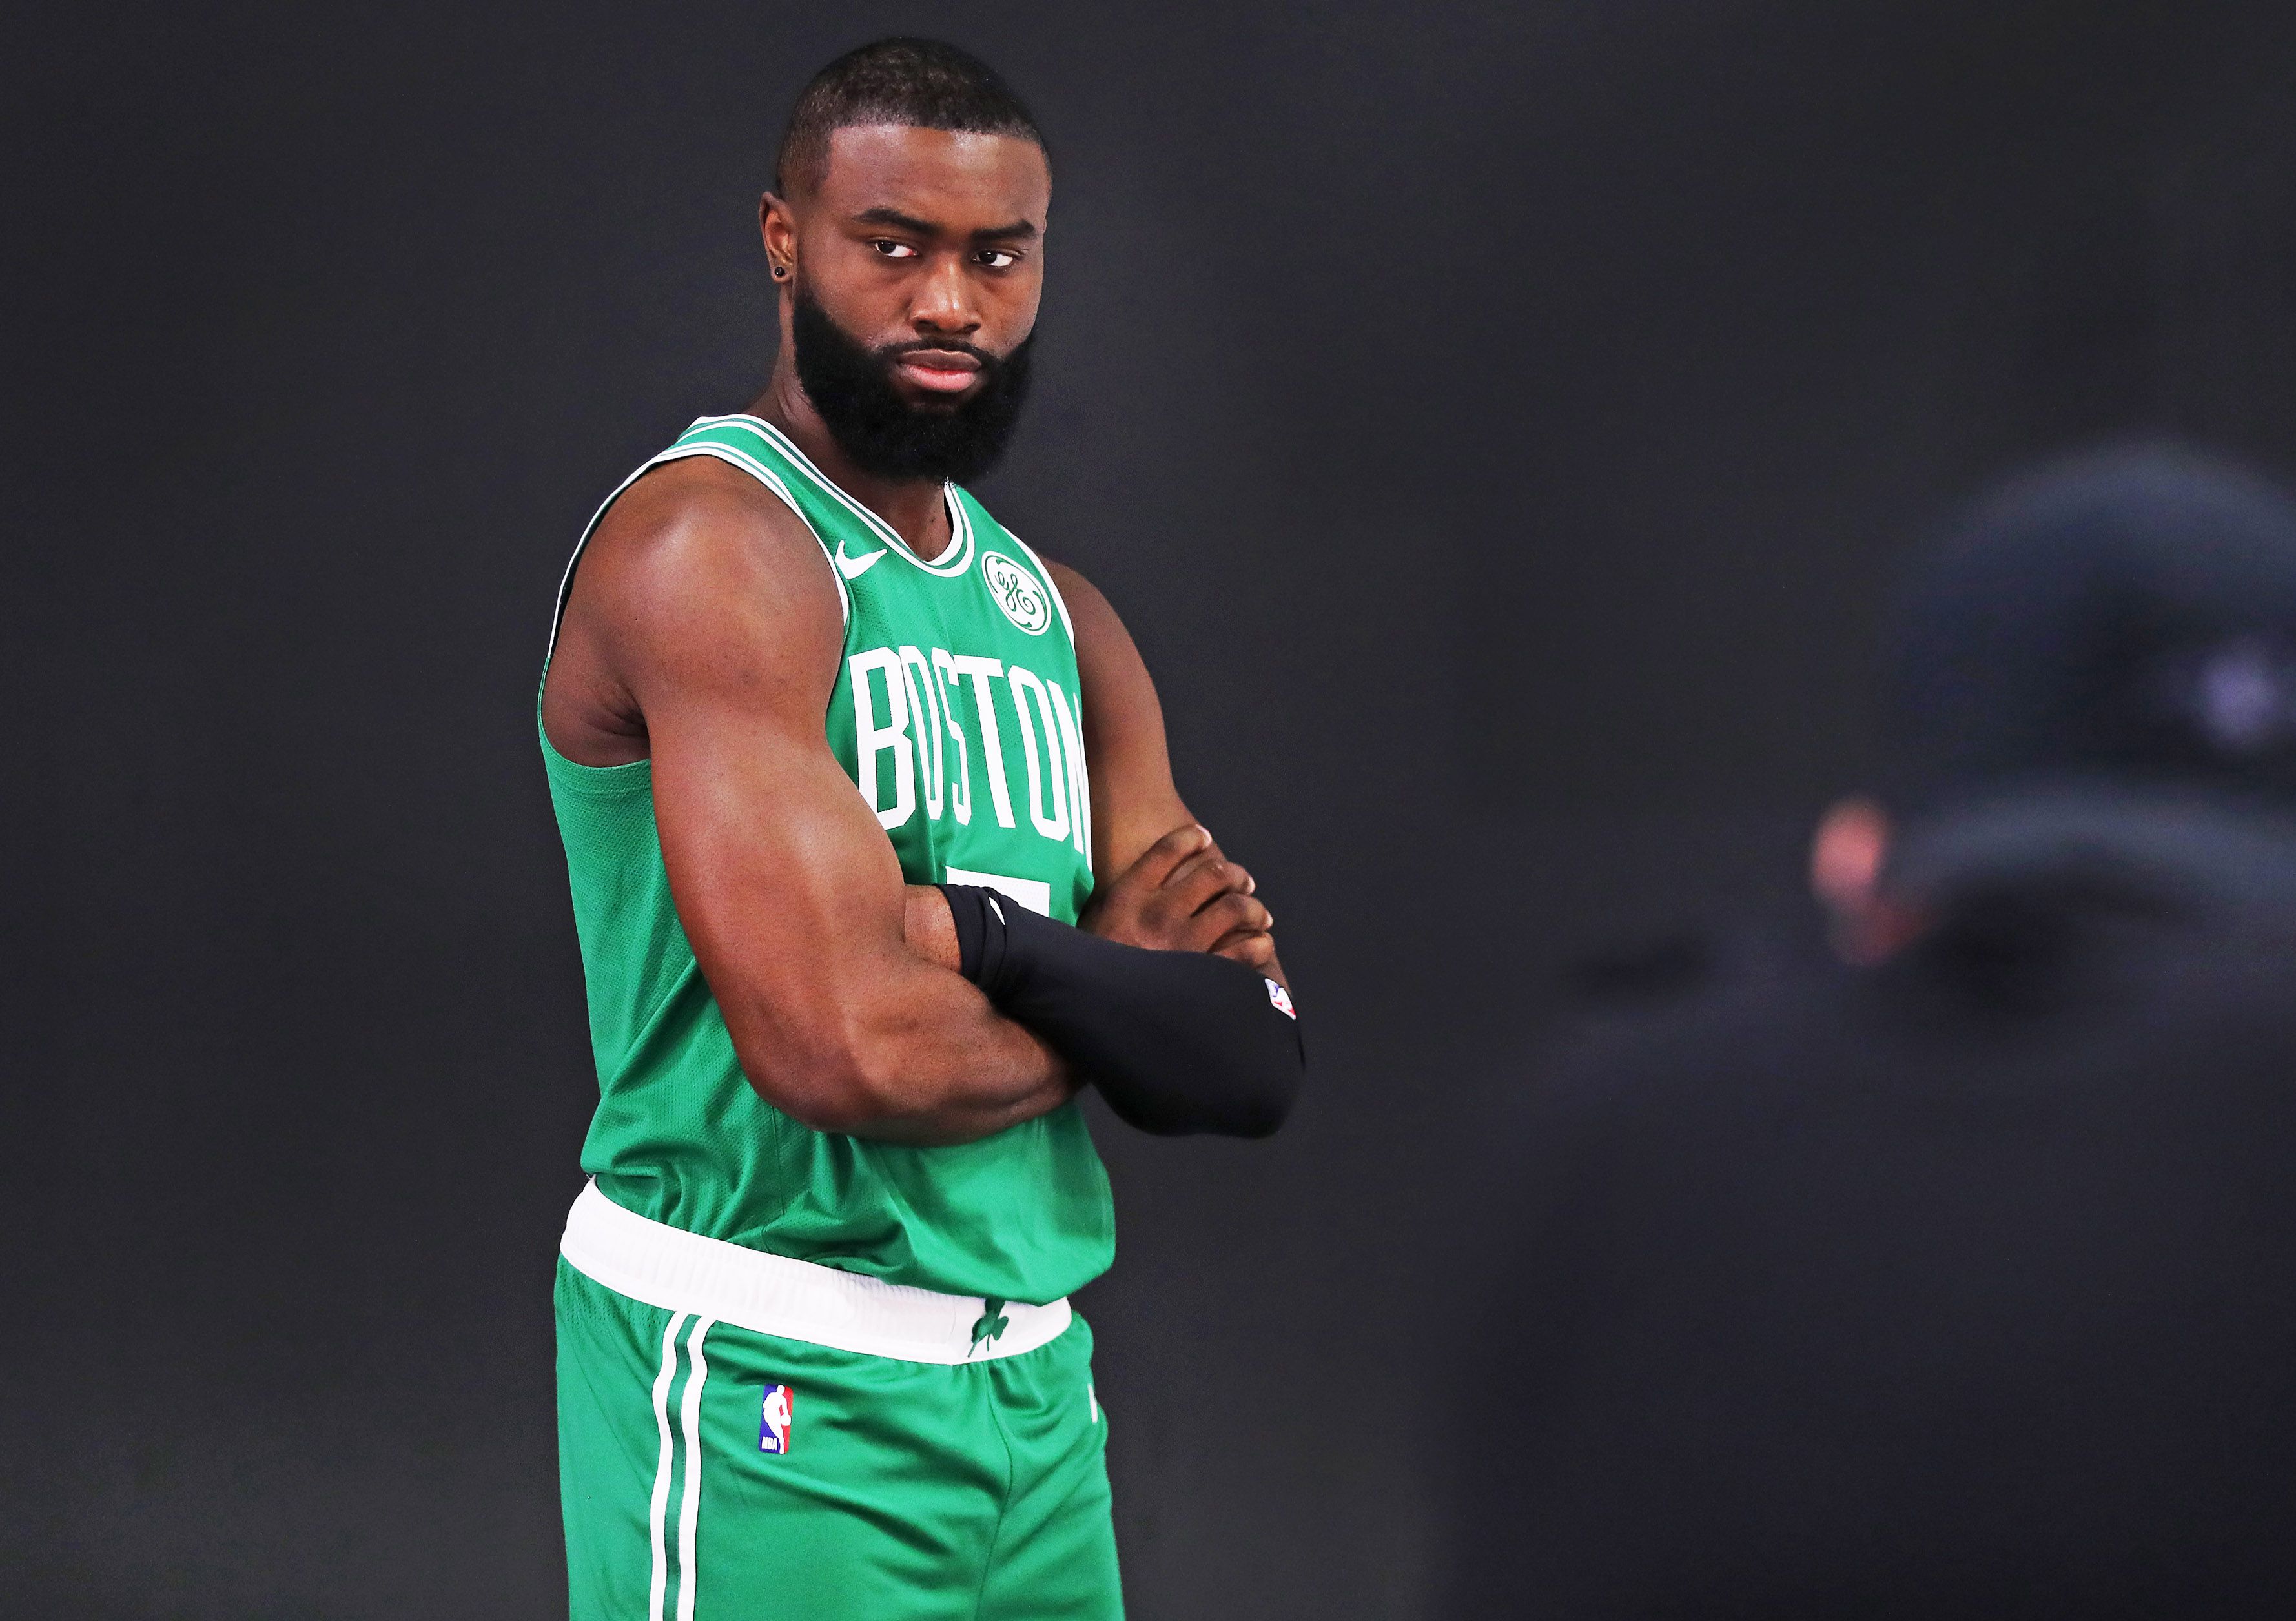 Celtics fans booed Jaylen Brown on draft night. There's no excuse